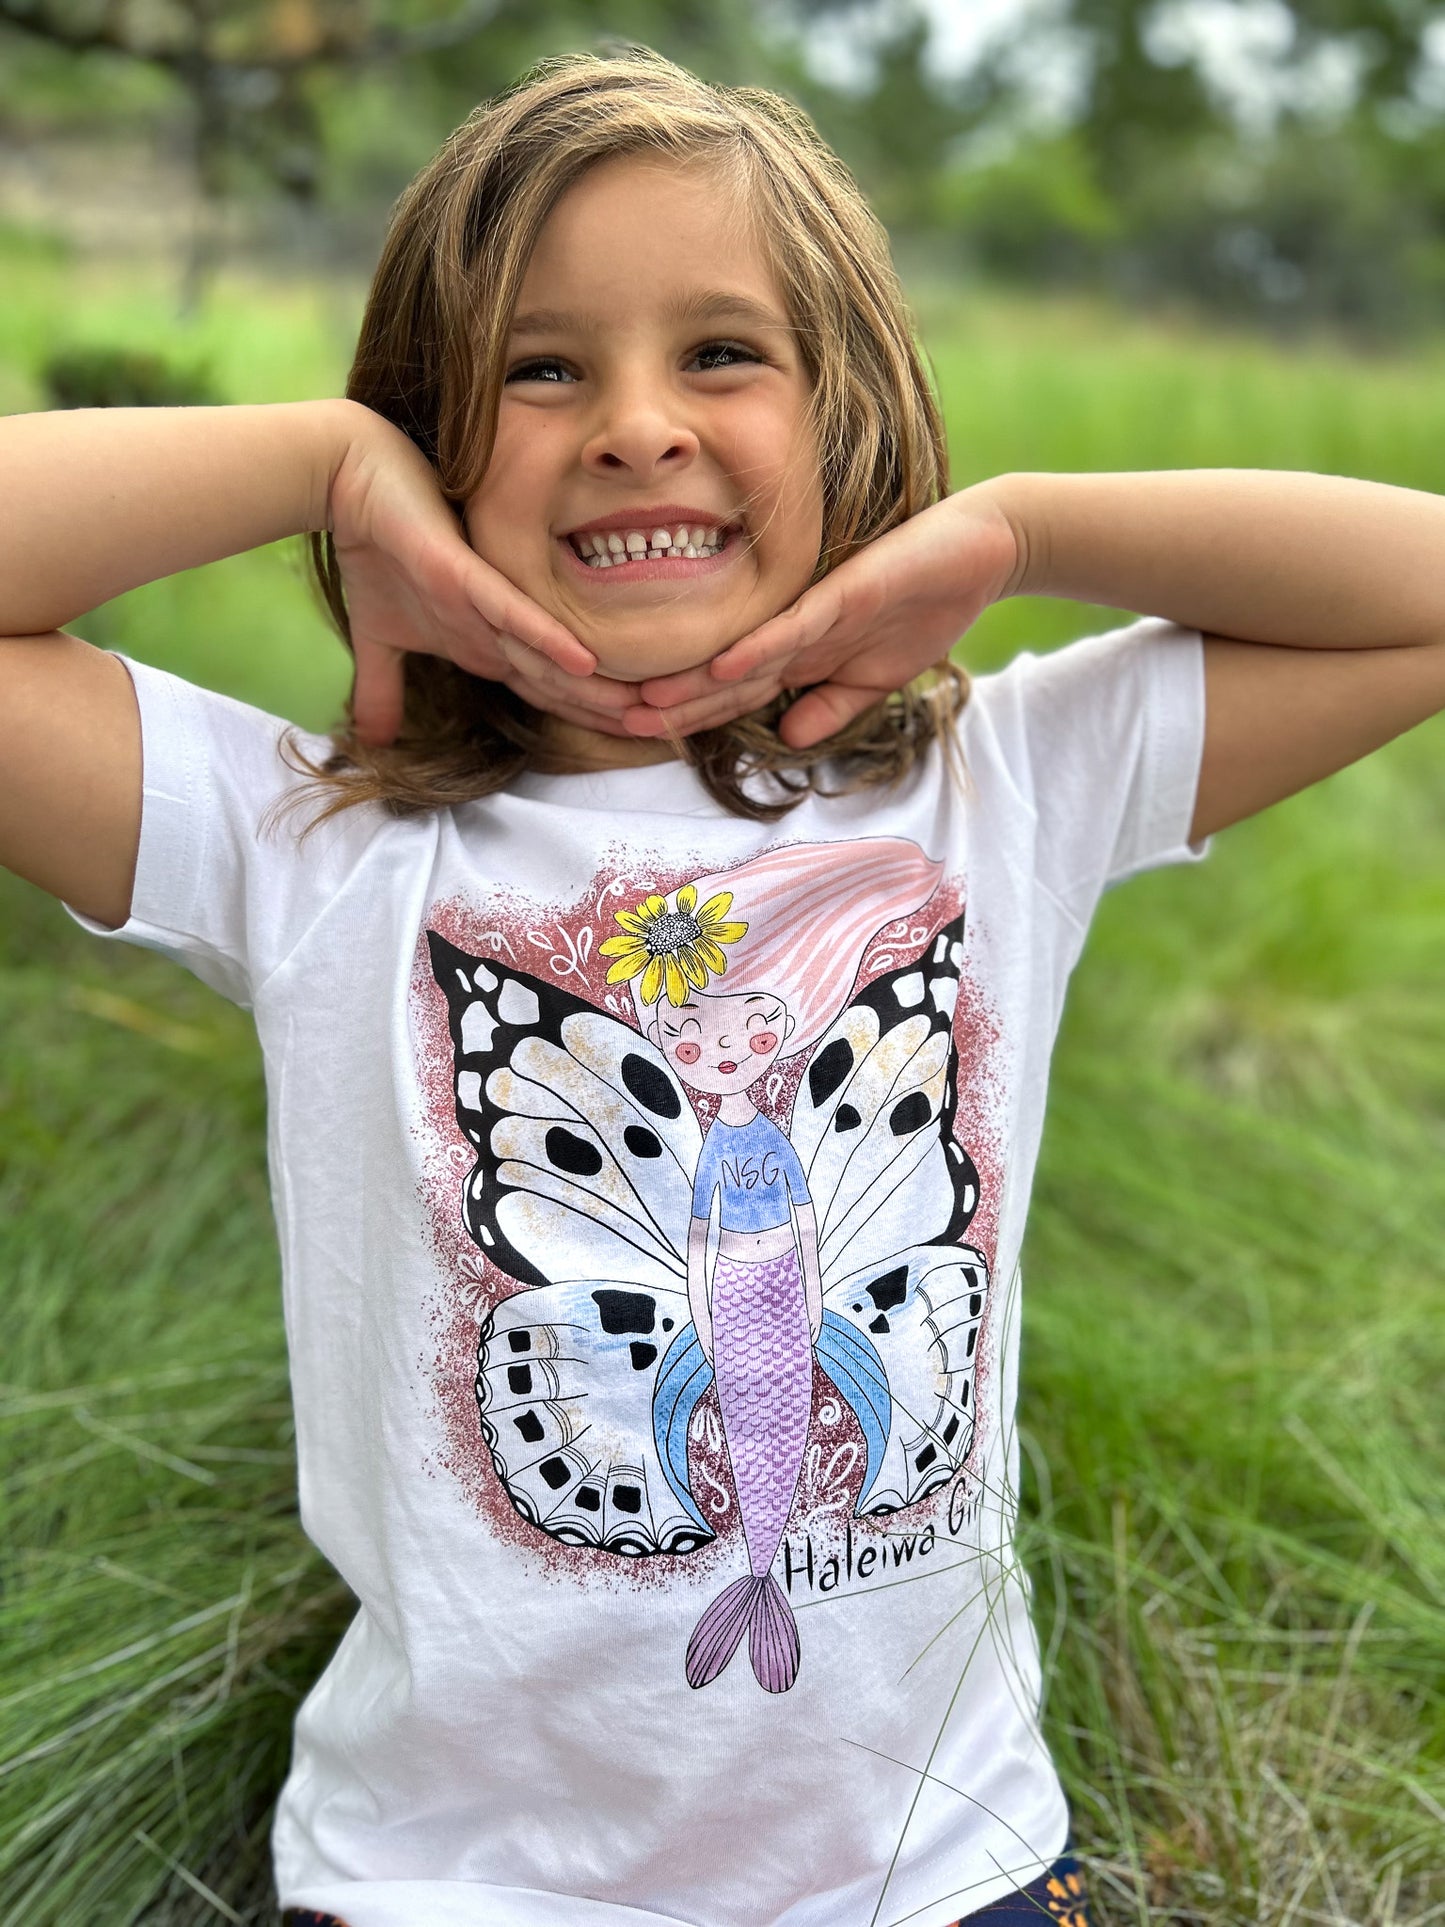 Load image into Gallery viewer, North Shore Girls Tee Collection for kids. Handmade in California Mermaid Haleiwa town mermaid butterfly. A perfect gift for the mermaid lover in your life.
